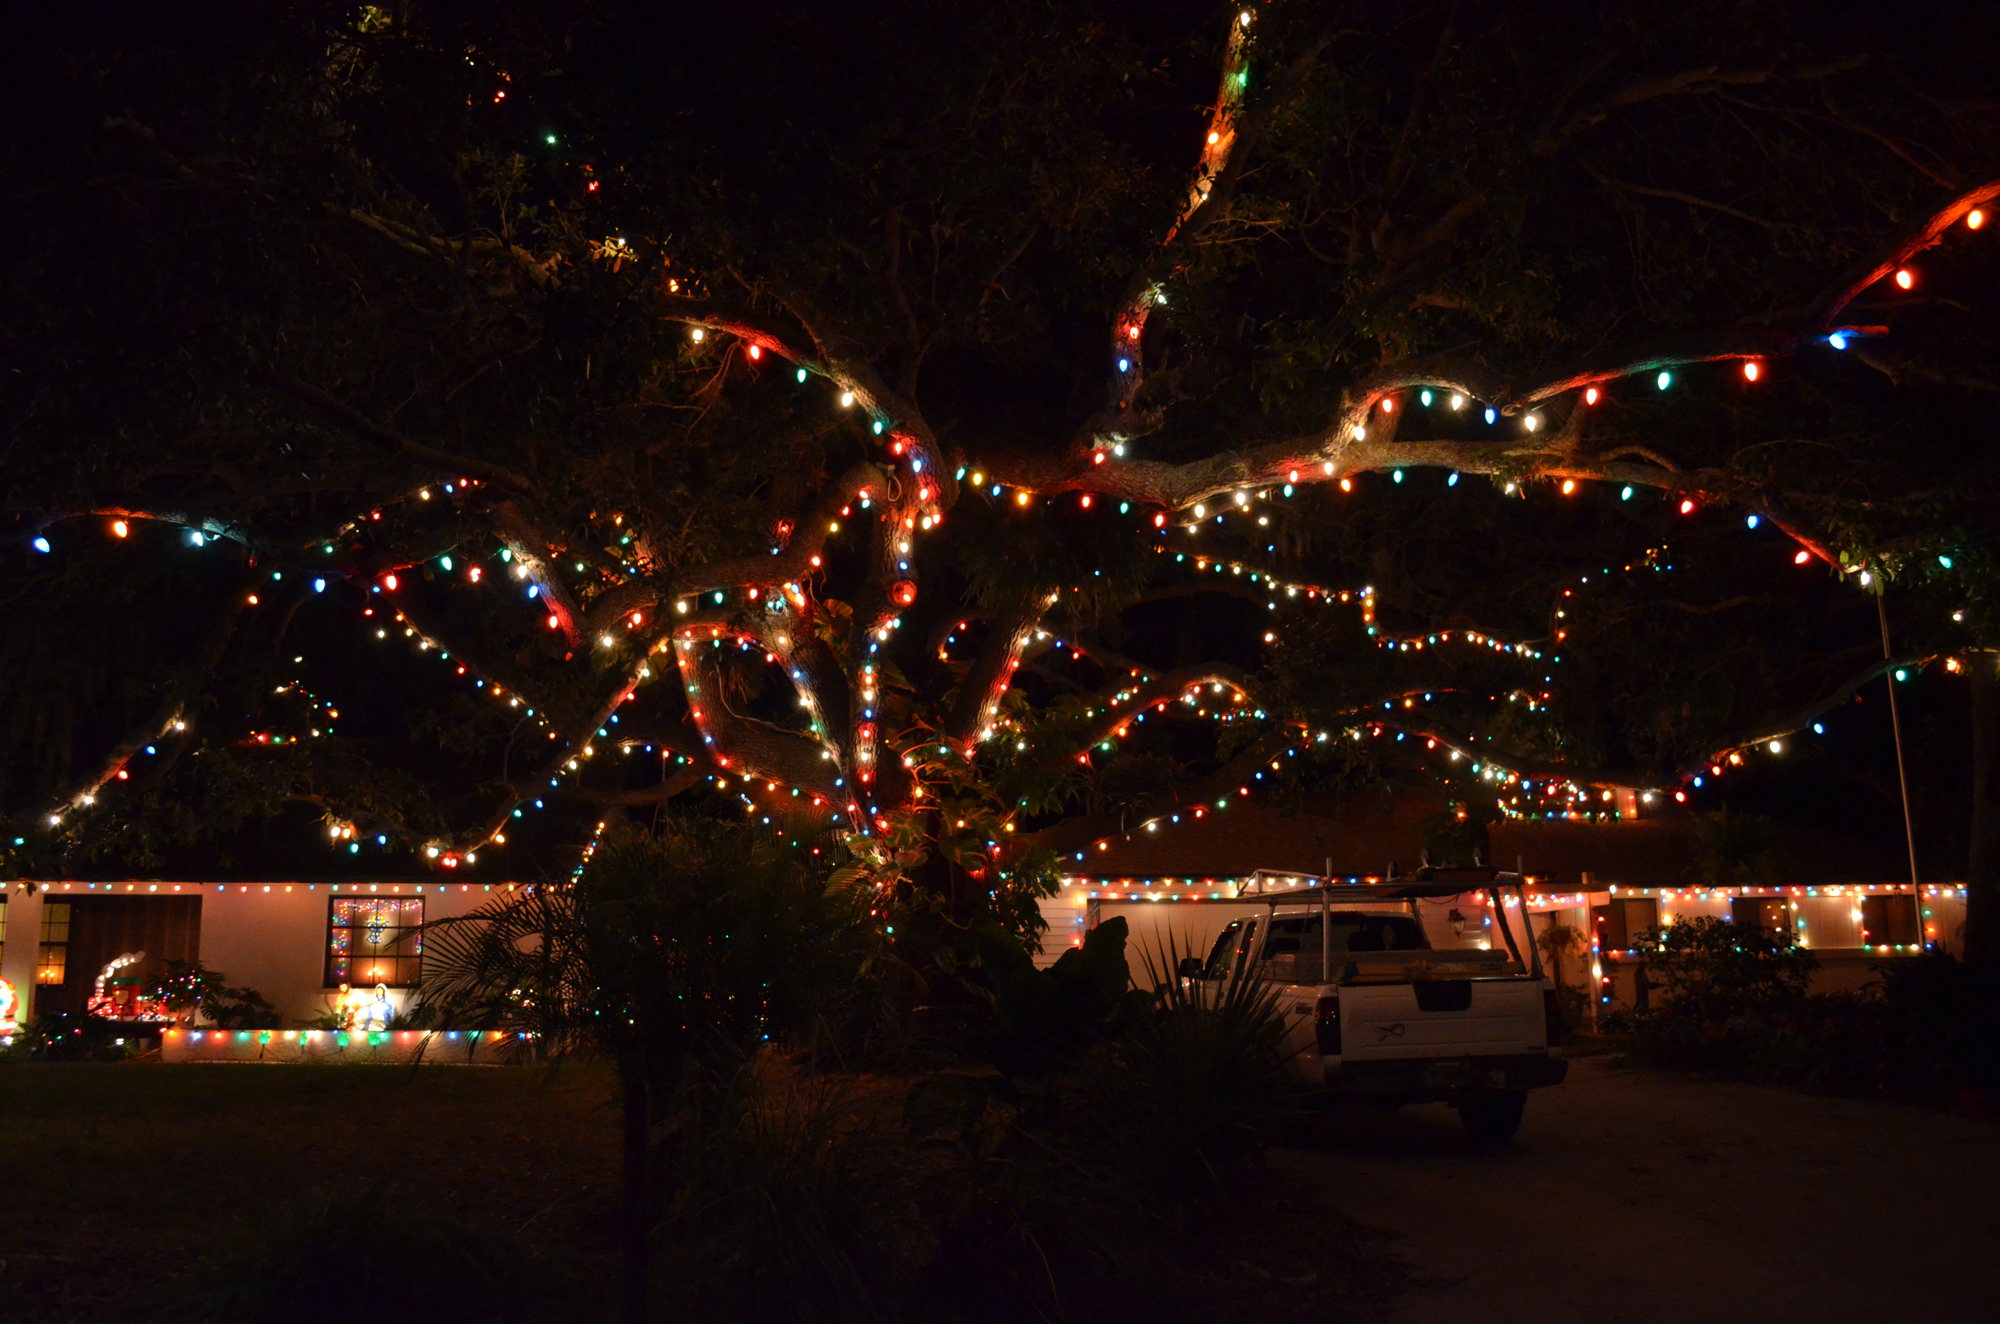 The tree at 2504 Regatta Circle is the focal point for the cul-de-sac that is decorated with lights.